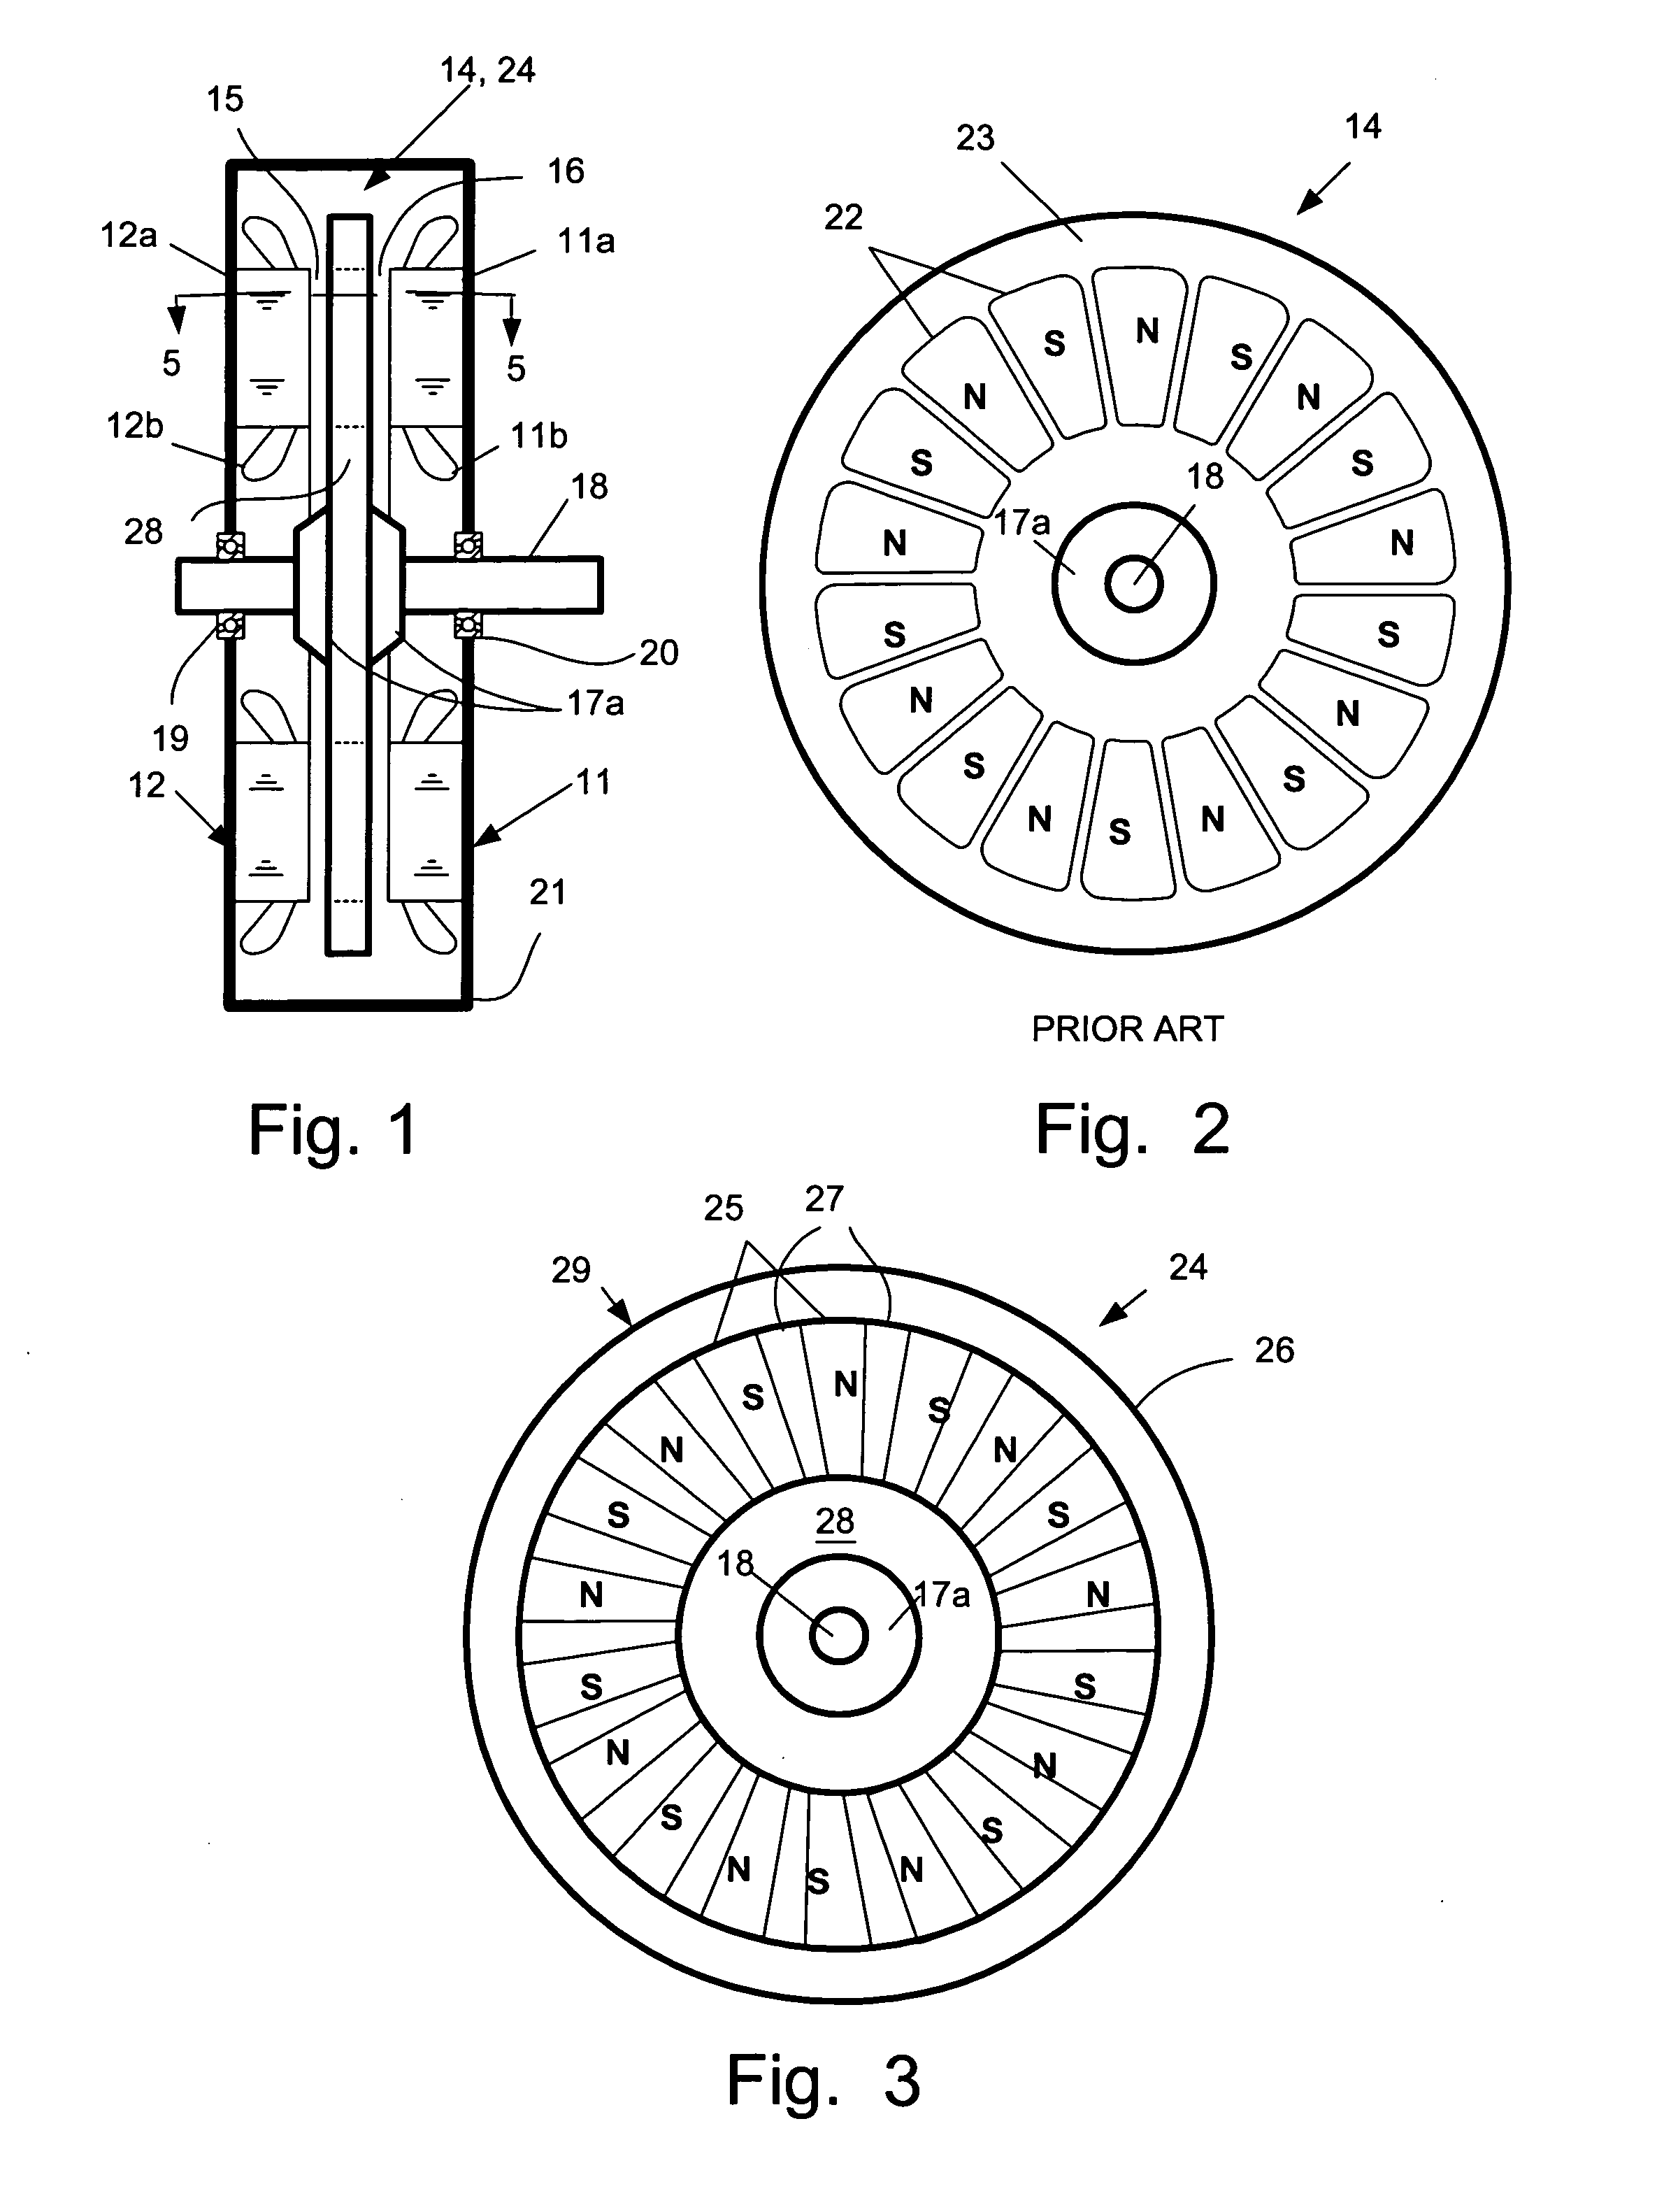 Axial gap permanent magnet reluctance motor and method